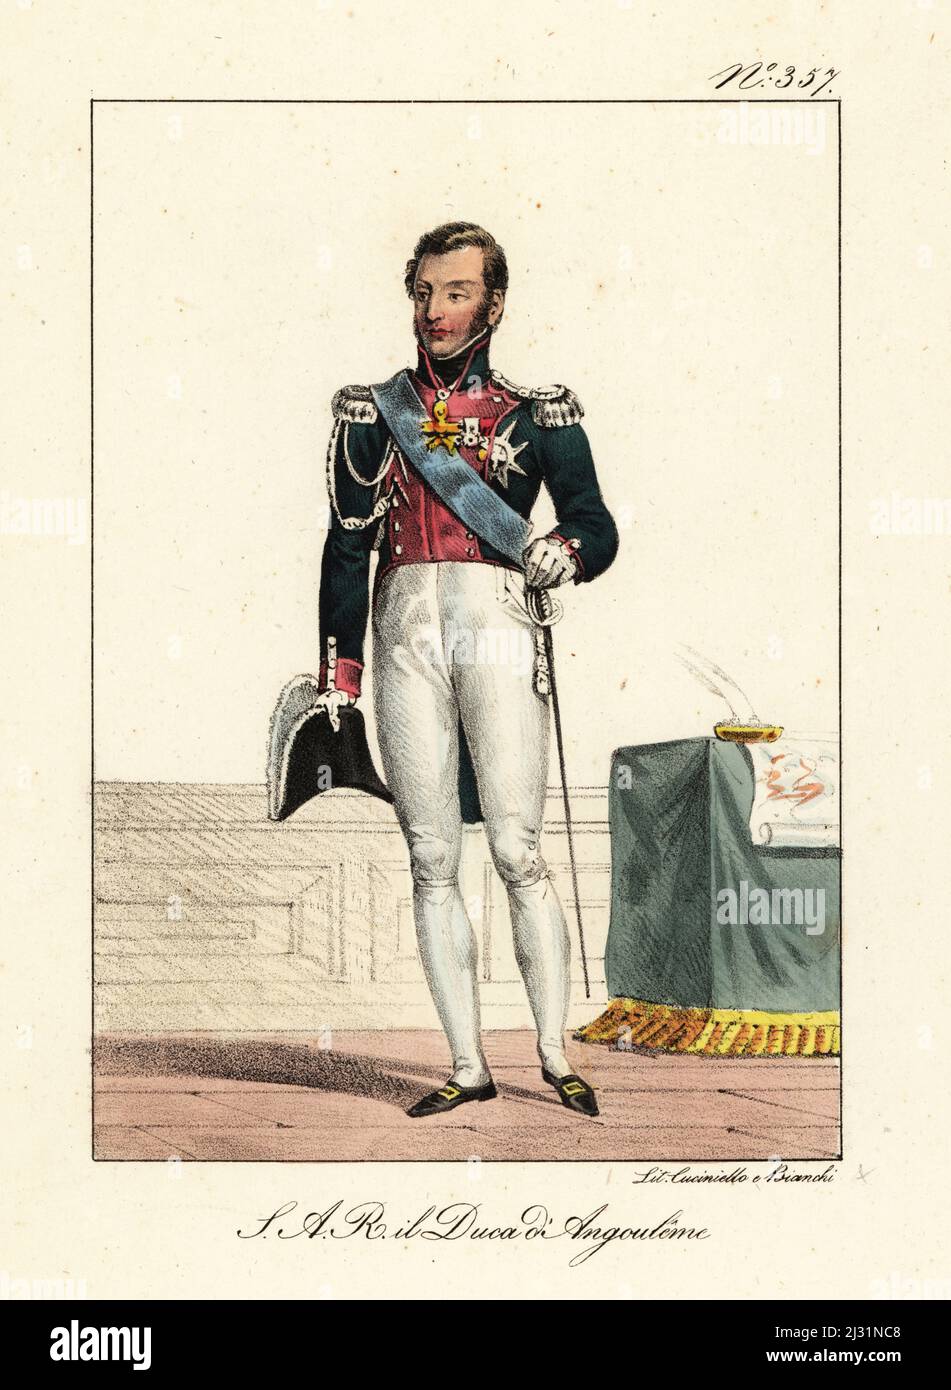 Louis Antoine of France, Duke of Angoulême (1775-1844), elder son of King Charles X of France, last Dauphin of France. With bicorne and court sword in military uniform. S.A.R. Monseigneur le Duc d'Angouleme. Handcoloured lithograph by Lorenzo Bianchi and Domenico Cuciniello after Hippolyte Lecomte from Costumi civili e militari della monarchia francese dal 1200 al 1820, Naples, 1825. Italian edition of Lecomte’s Civilian and military costumes of the French monarchy from 1200 to 1820. Stock Photo